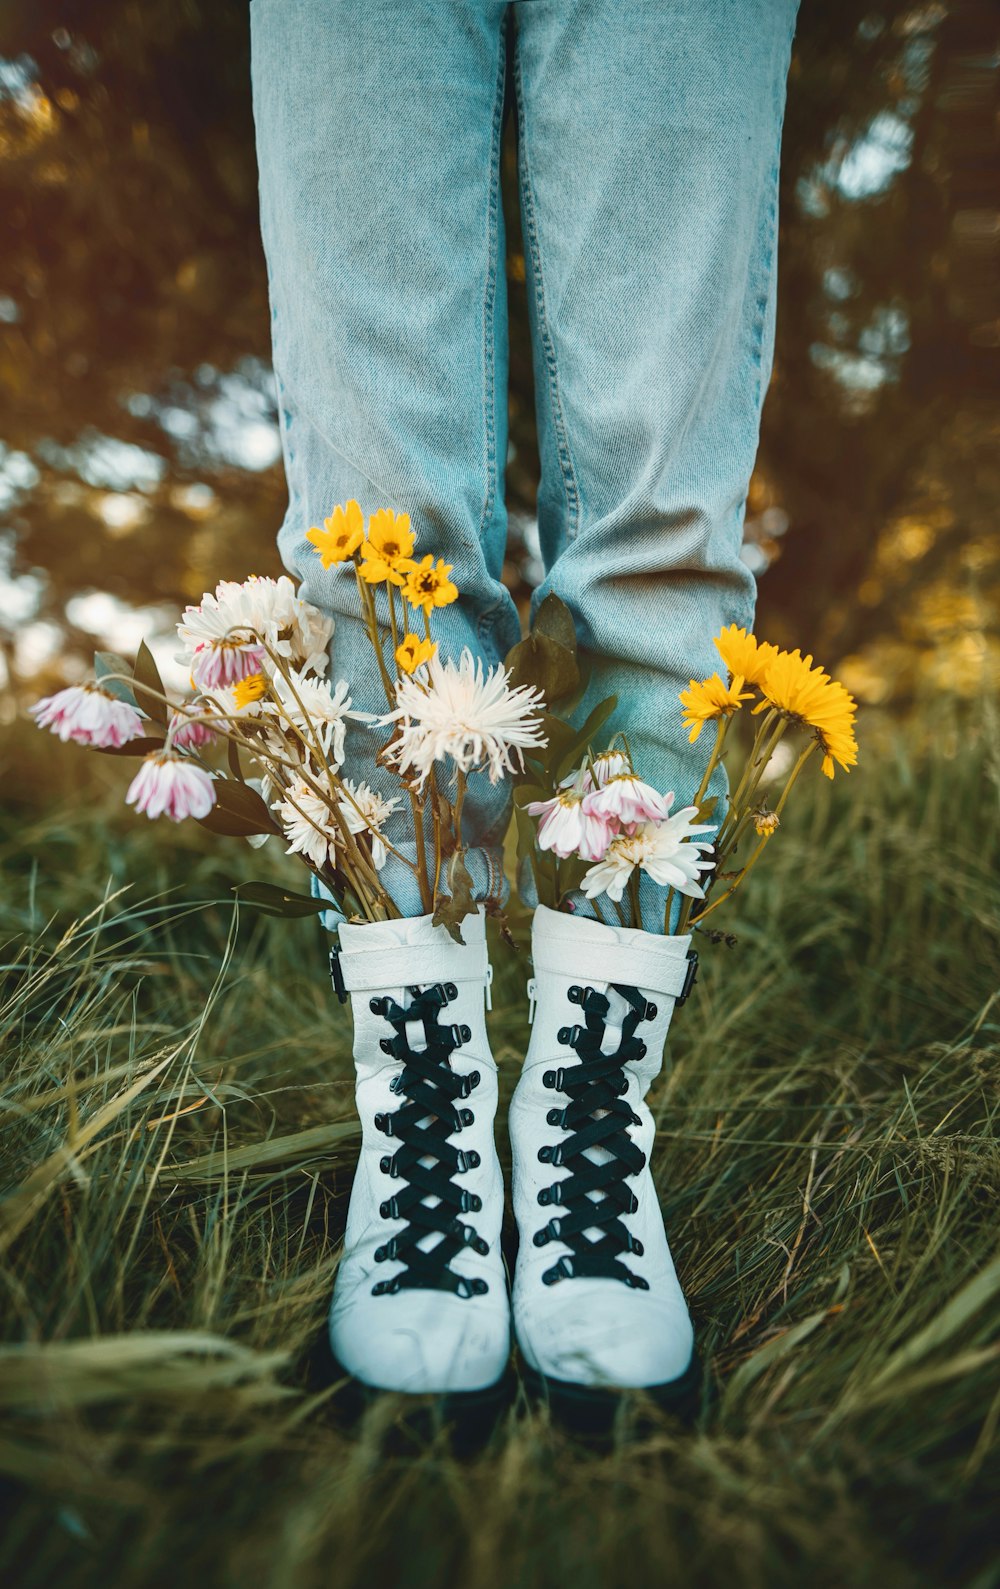 person in blue denim jeans and white and black boots holding white and yellow flowers